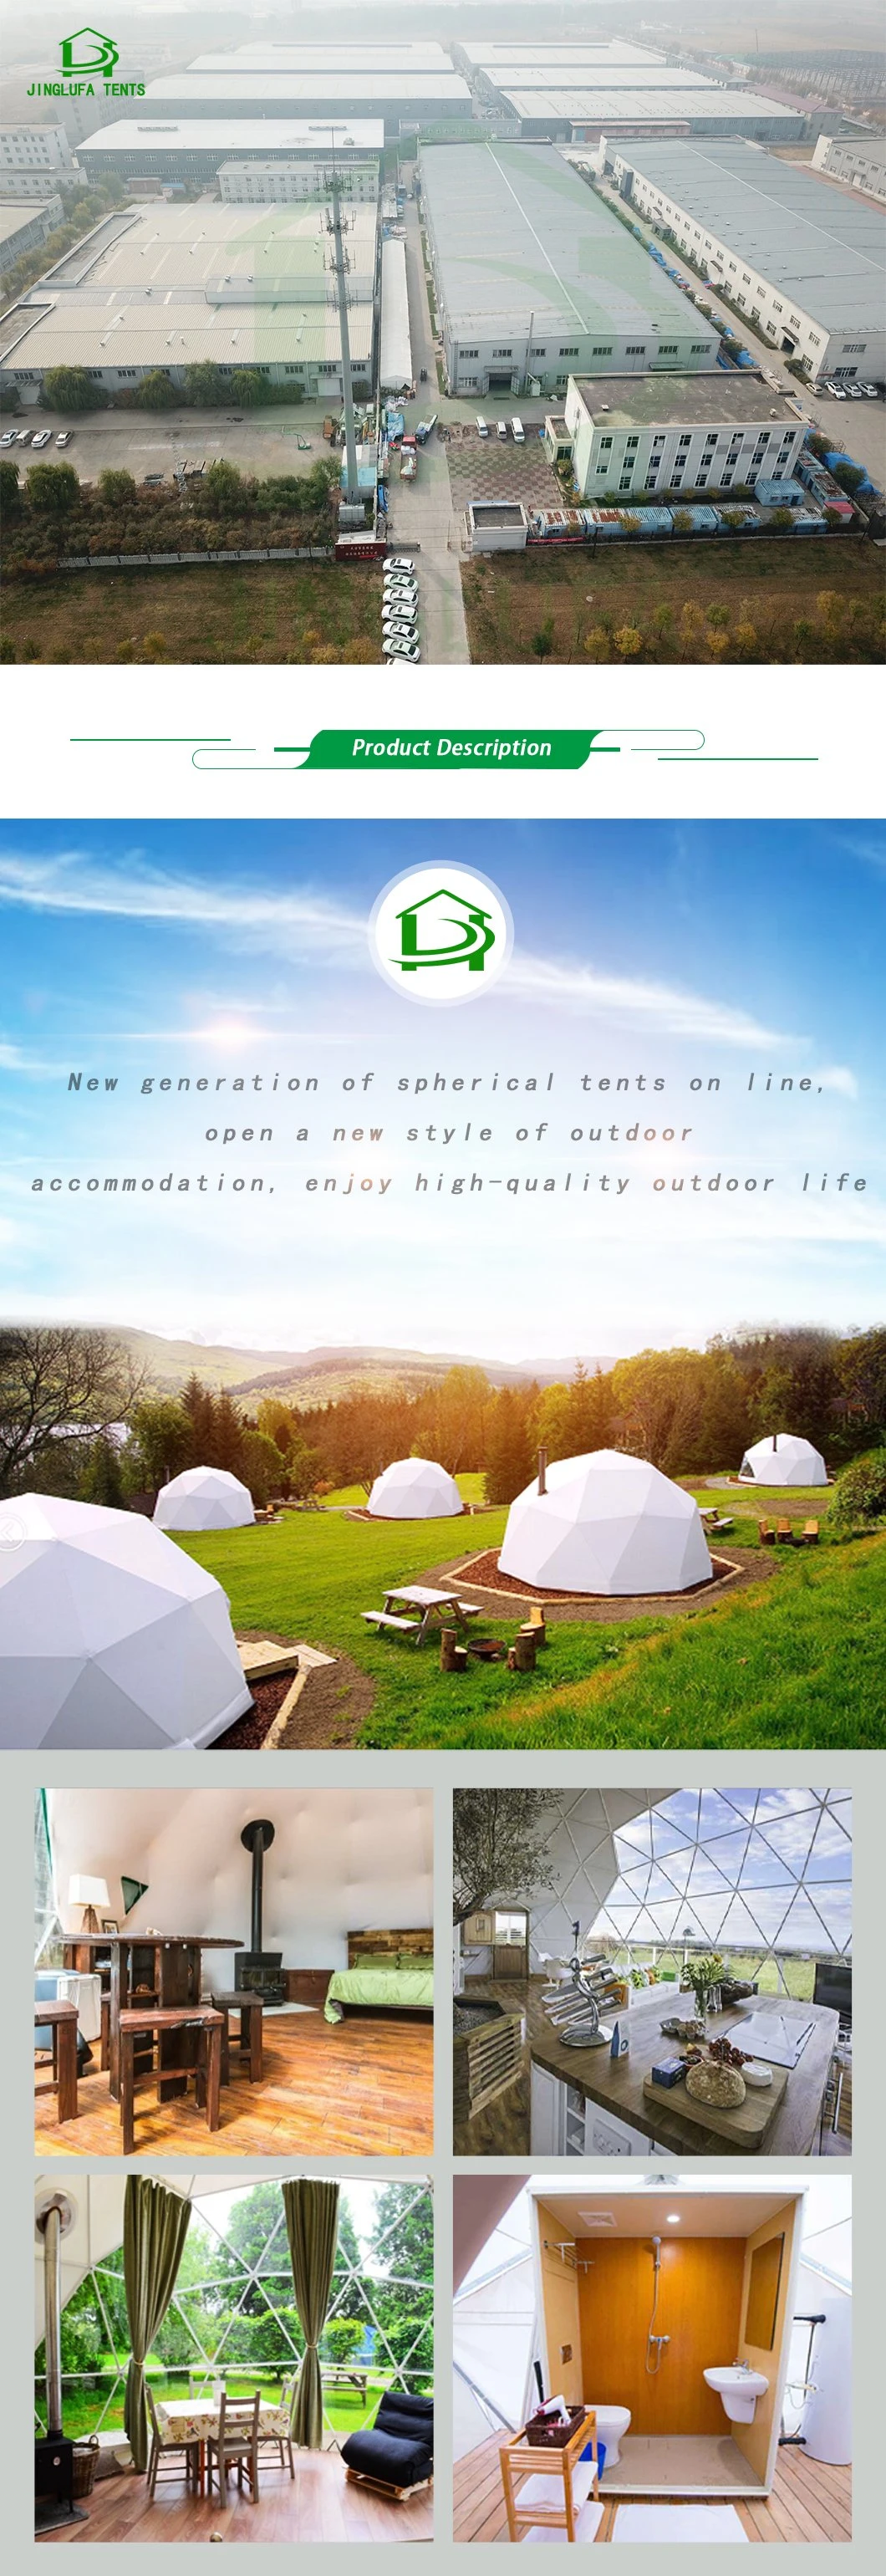 5m 6m Dome Cabin Glamping Hotel Tent